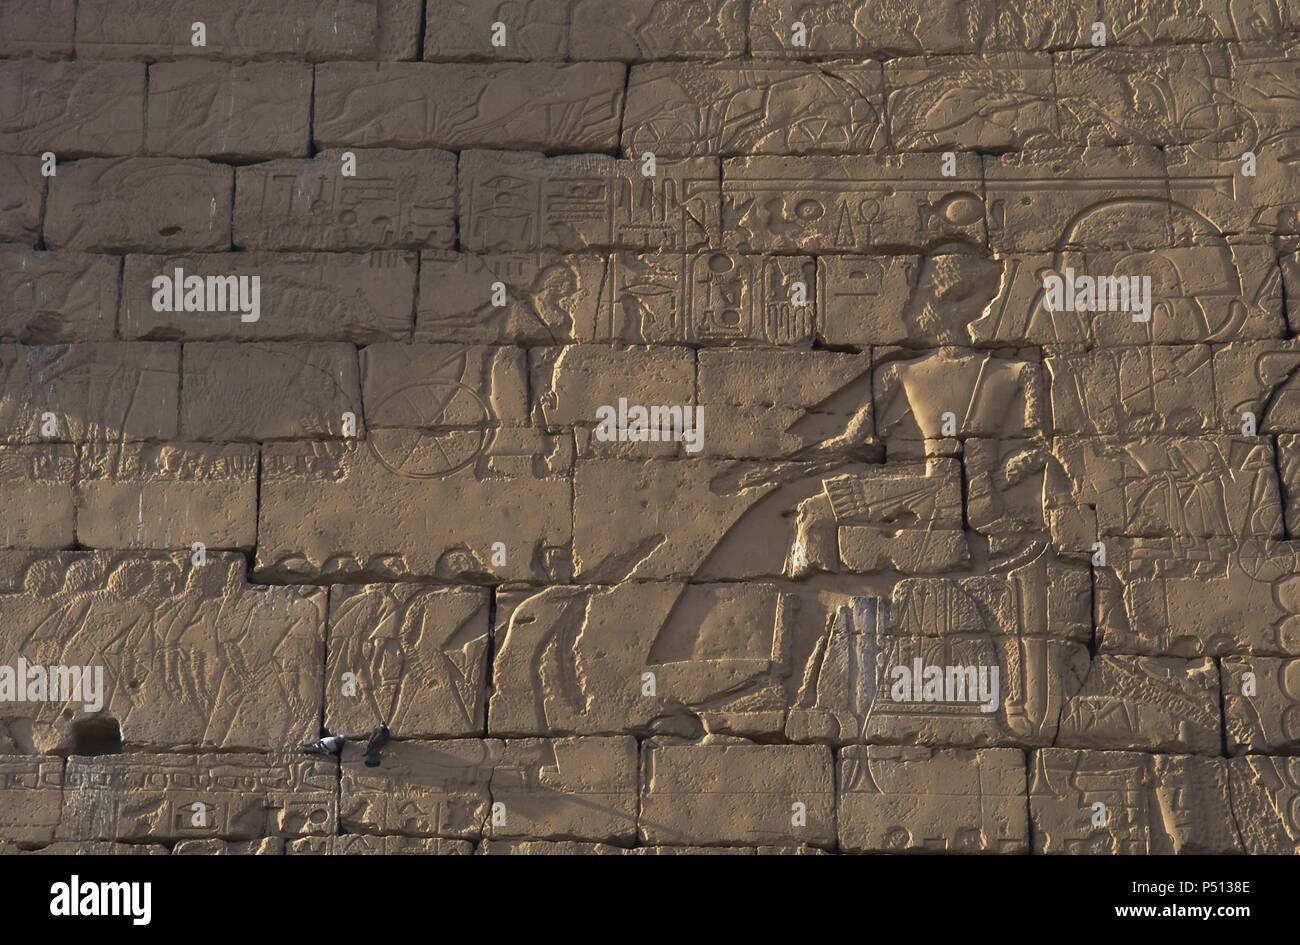 RAMSES II remained seated for a council with his officers, during the military campaign against the Hittites. New Kingdom. Temple of Luxor. Egypt. Stock Photo